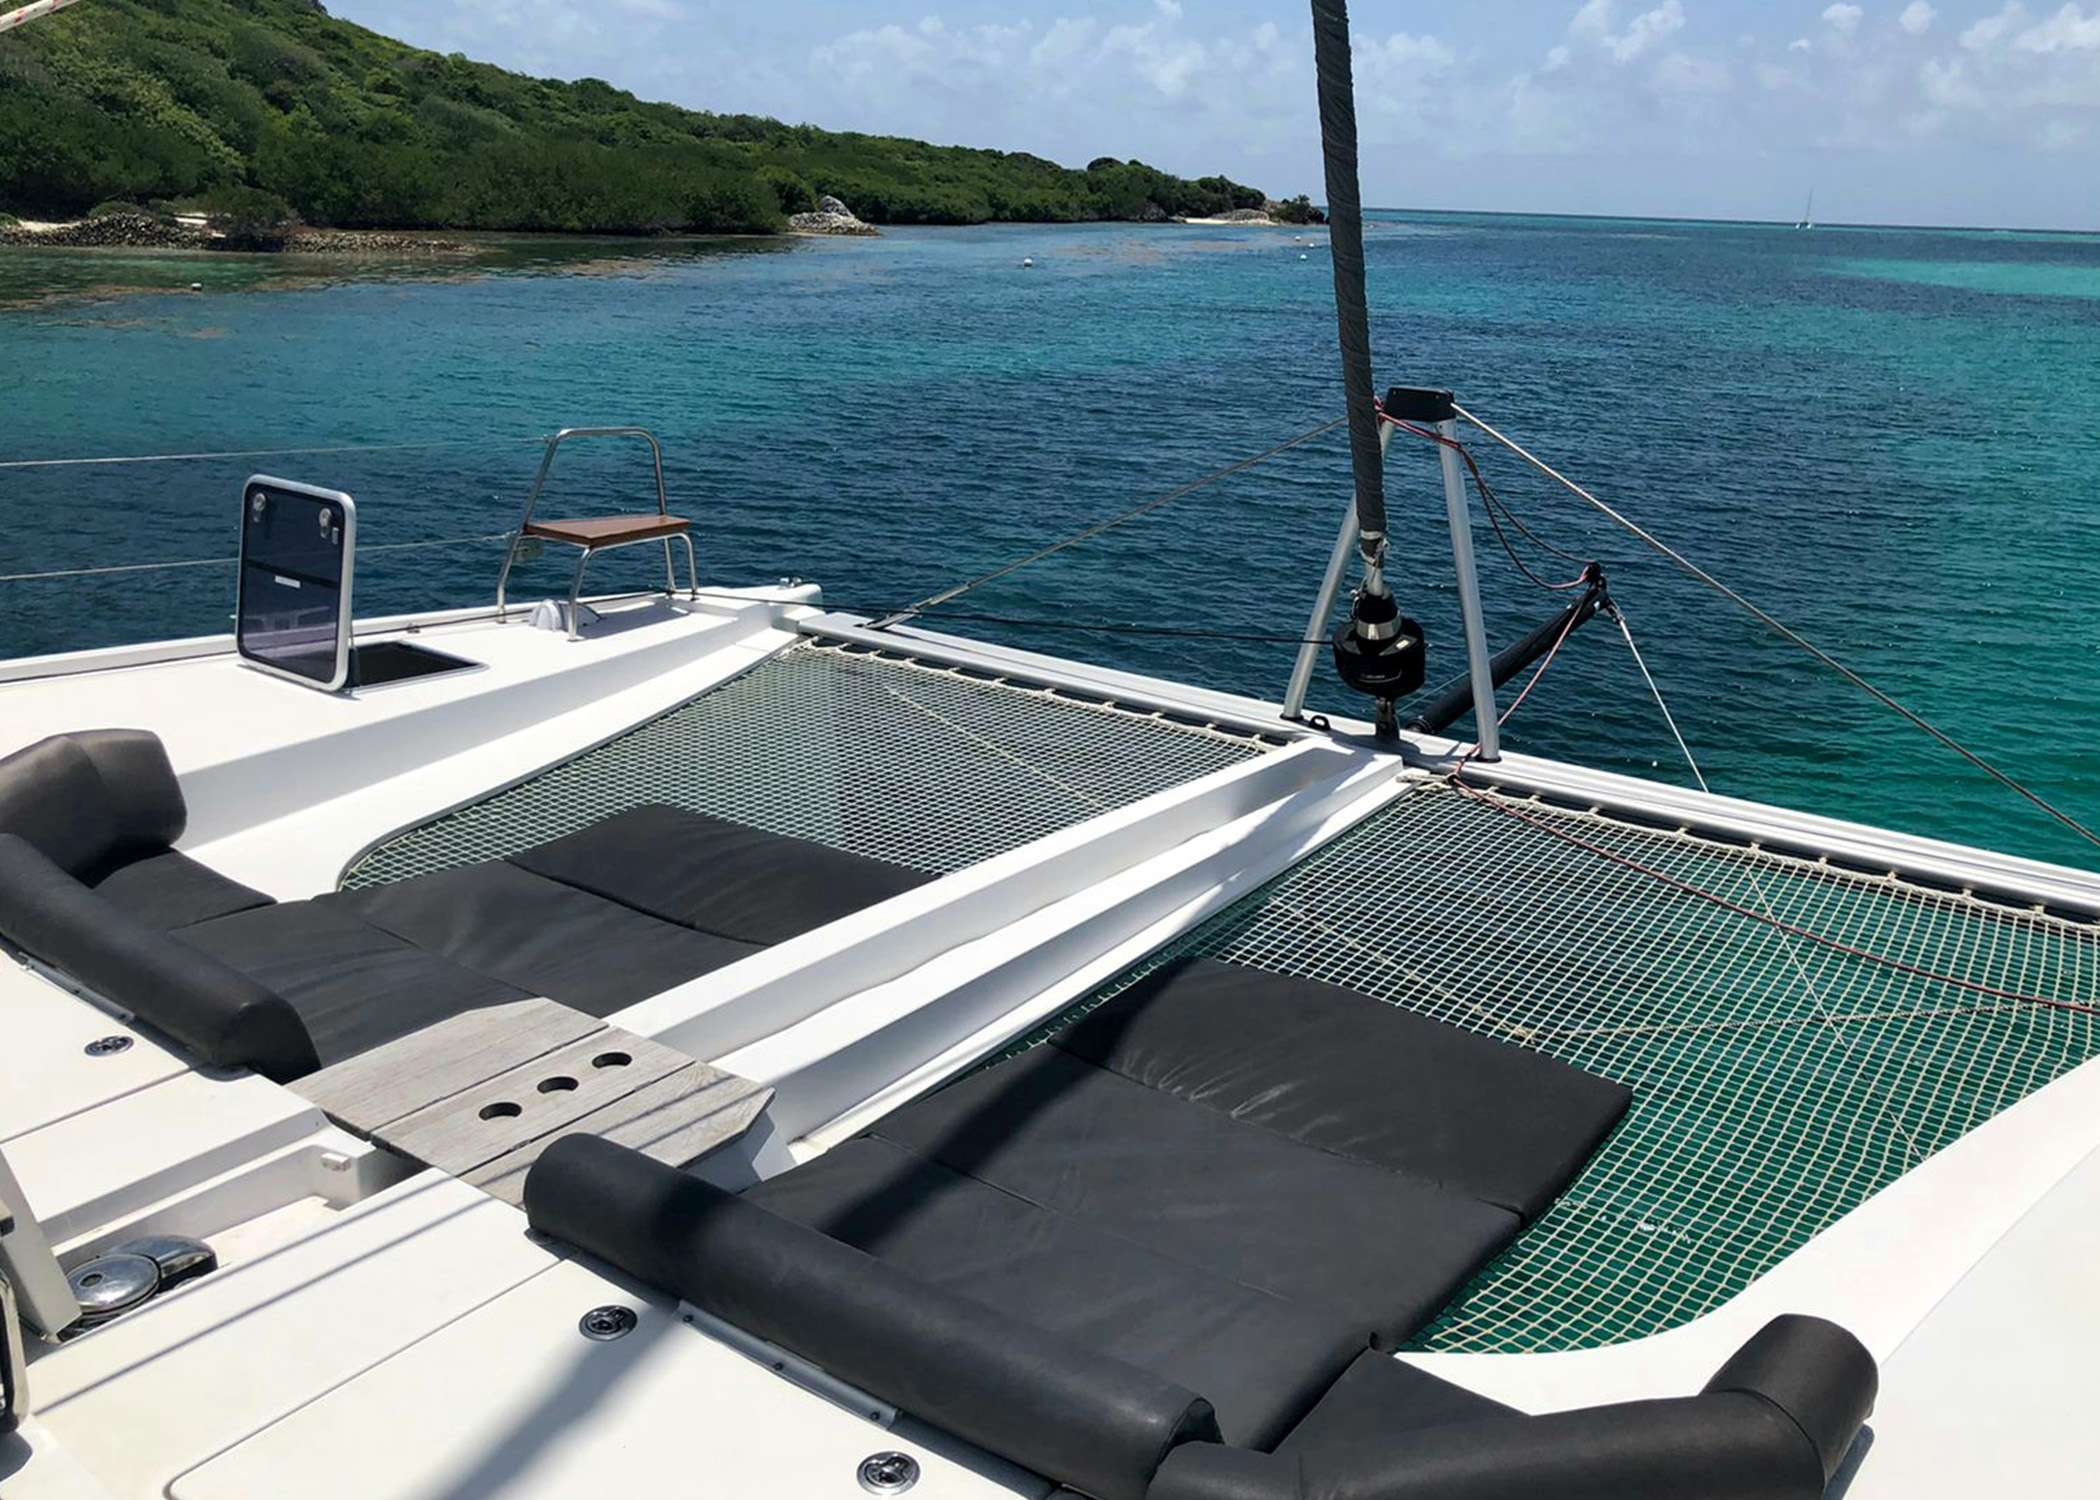 Freedom - Yacht Charter St Vincent & Boat hire in Caribbean 5